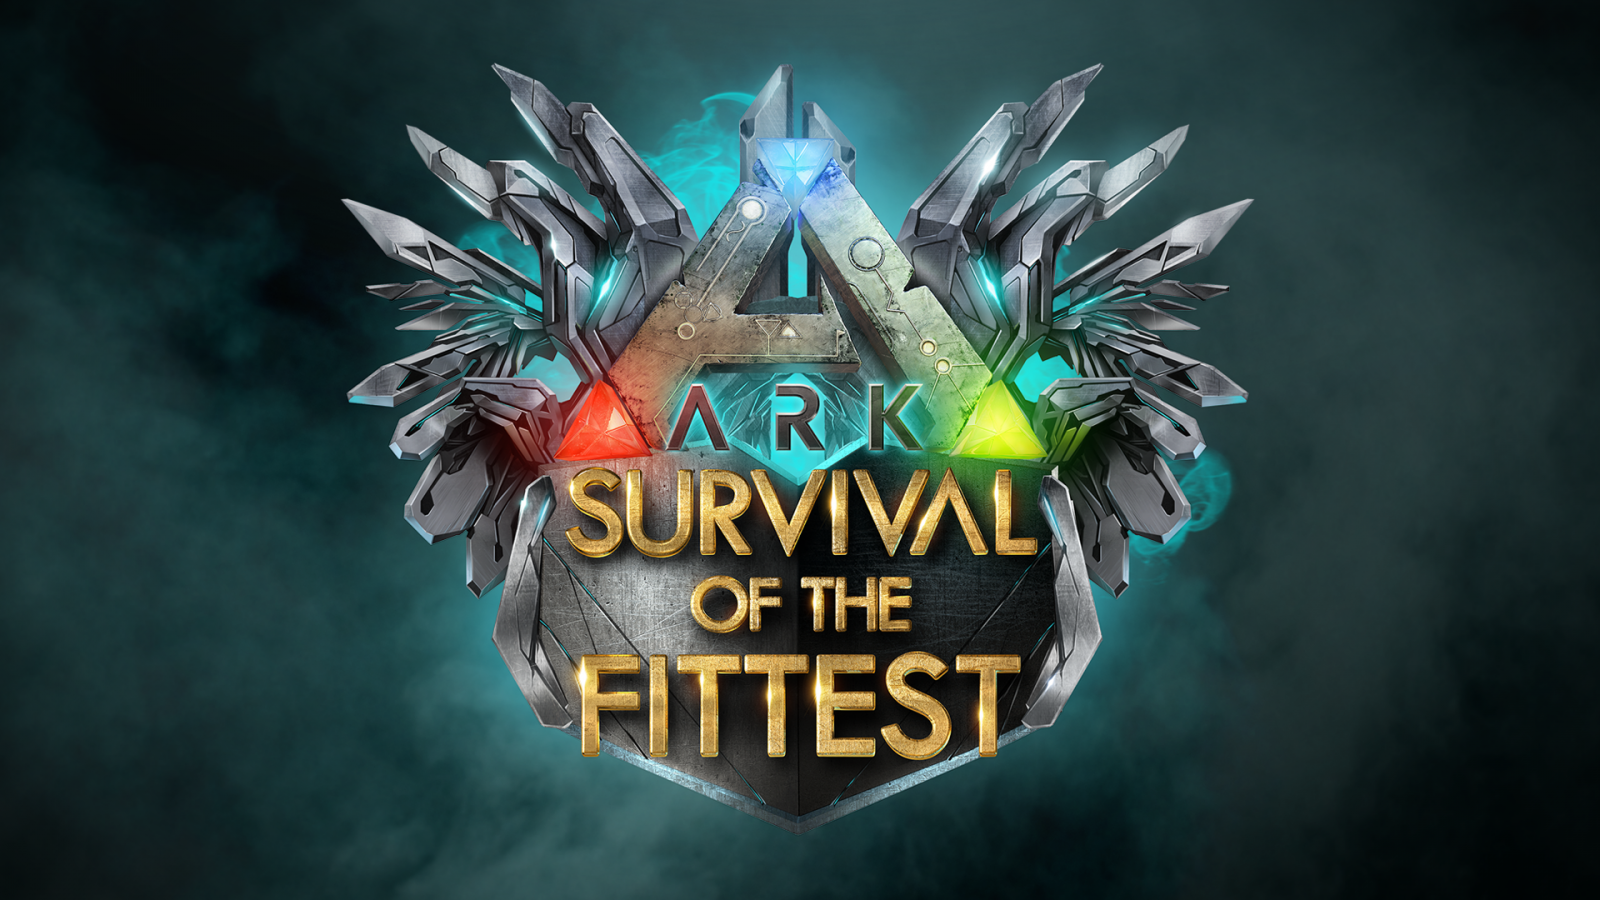 ARK: Survival of the Fittest for PS4 – Release delayed